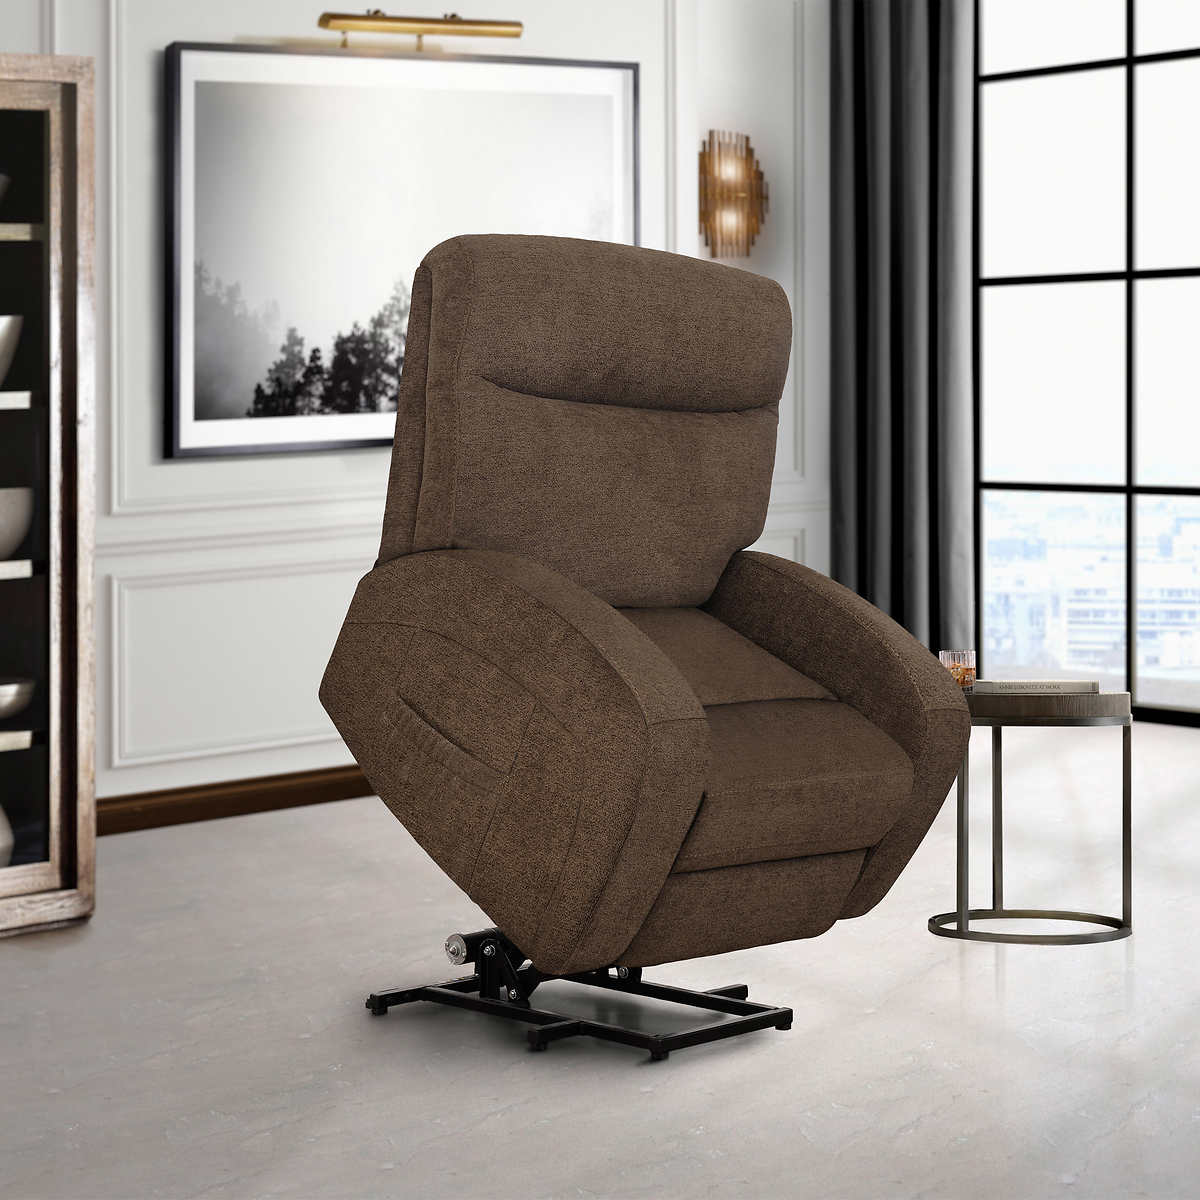 Sealy Astor Lift Chair